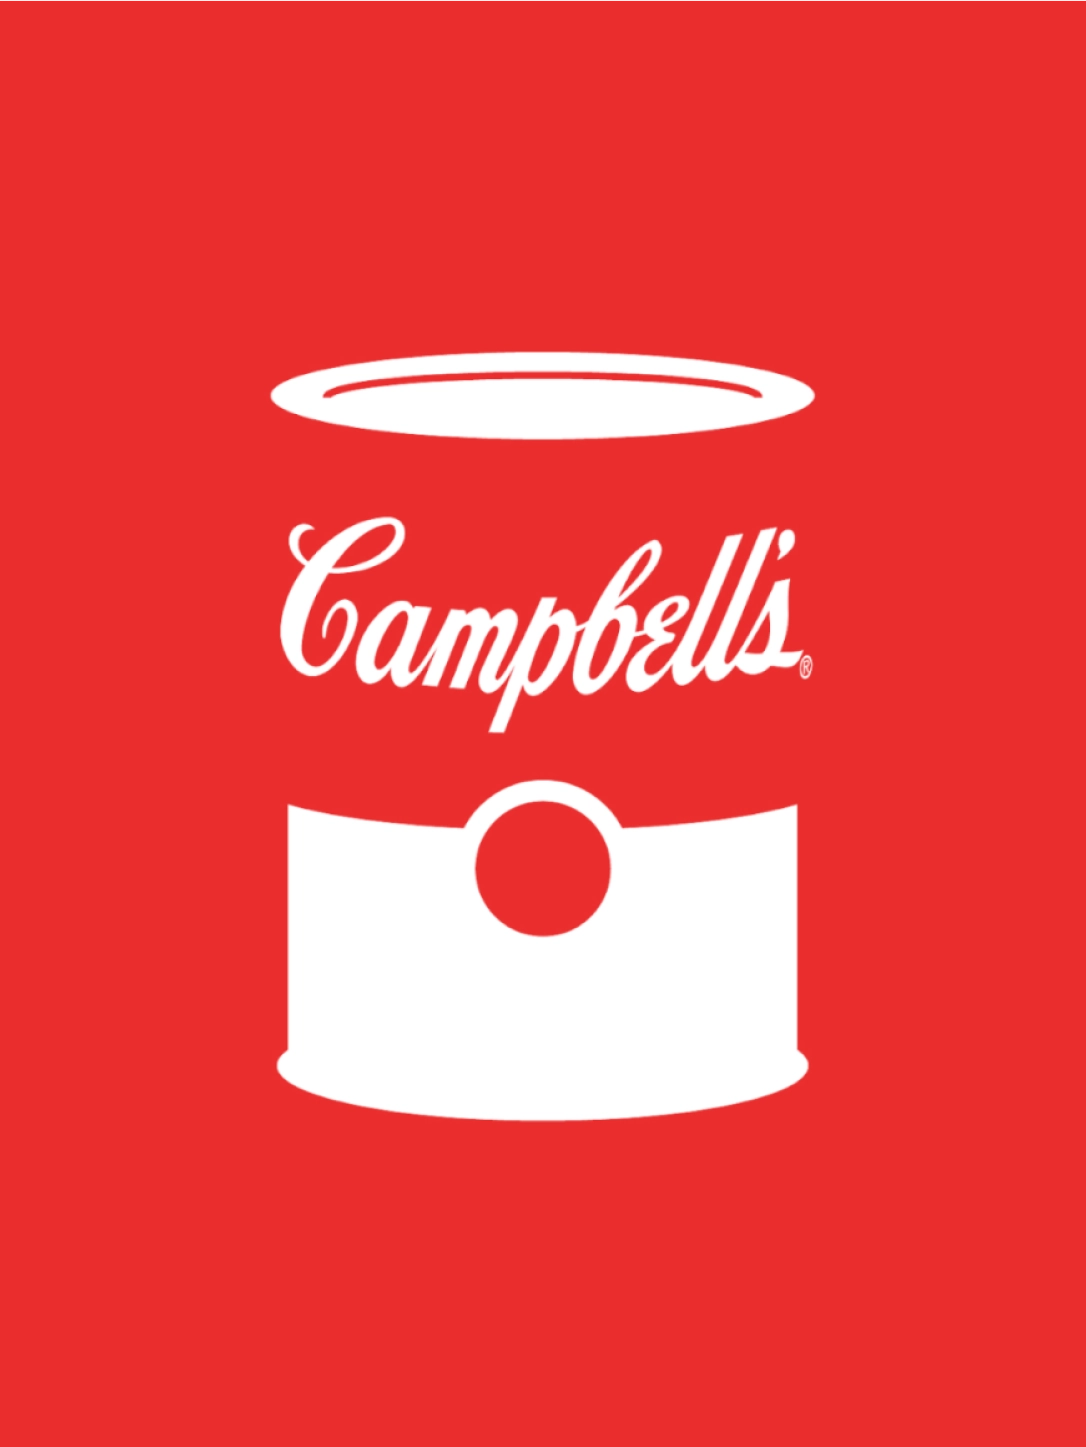 campbell's soup logo